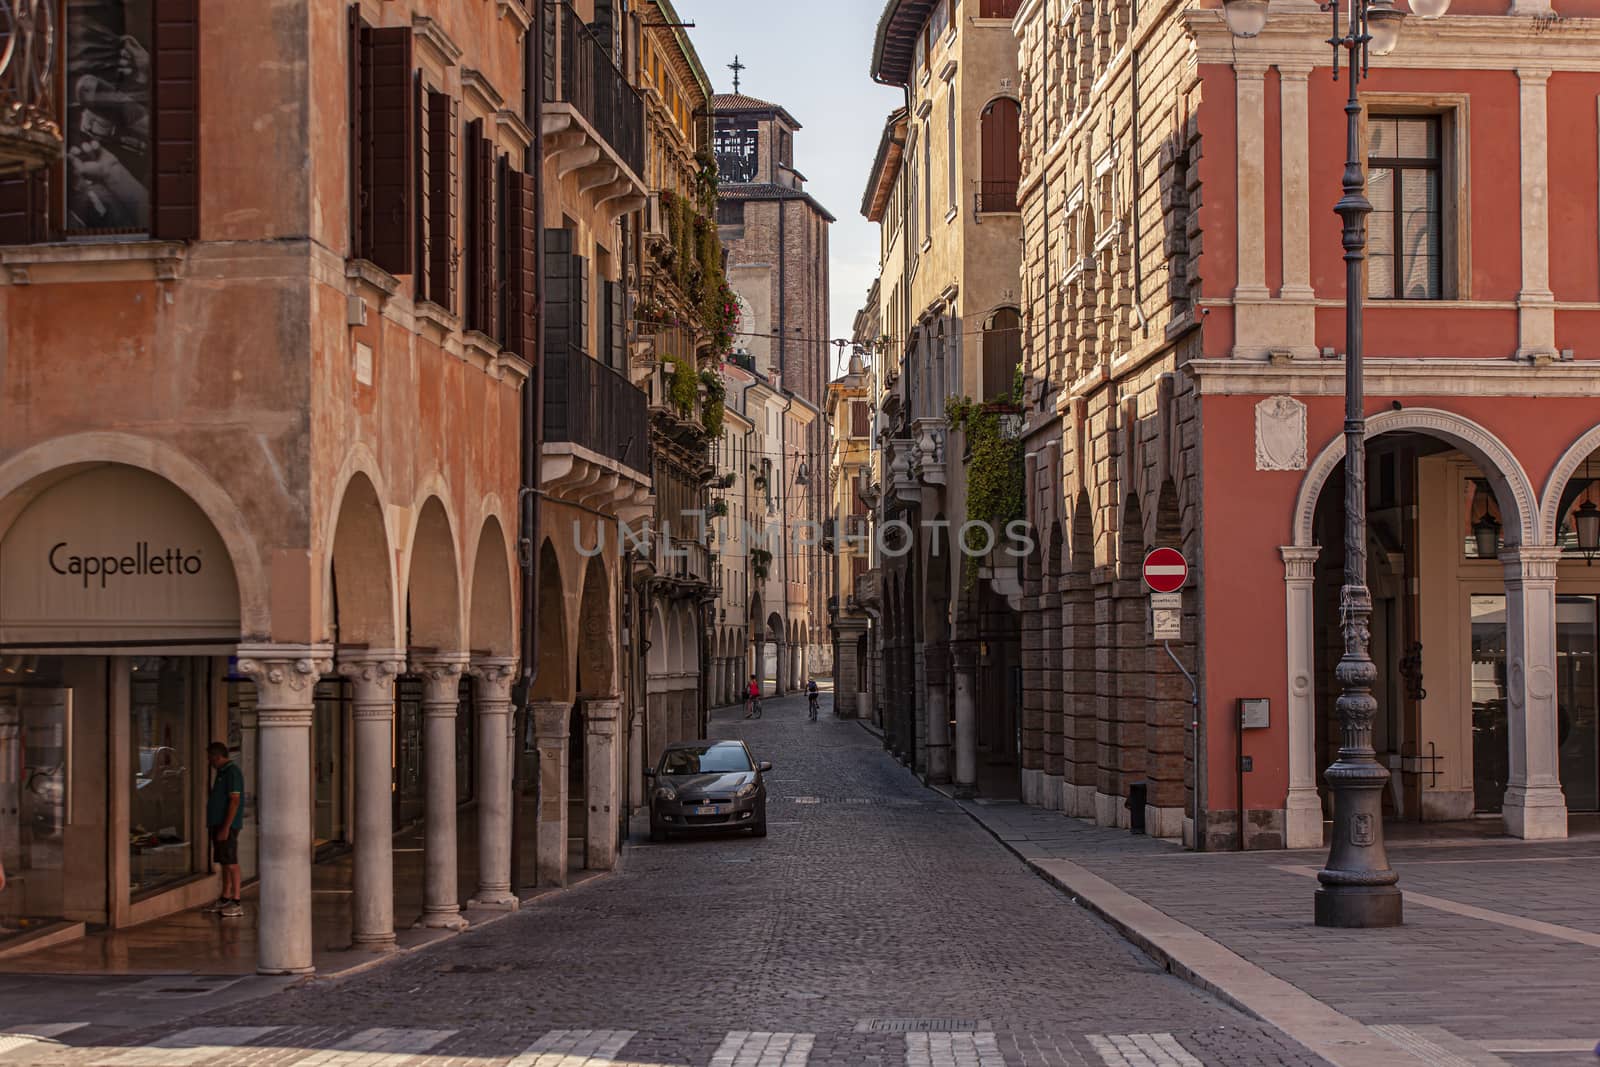 View of Calamaggiore one of the main street in Treviso 5 by pippocarlot